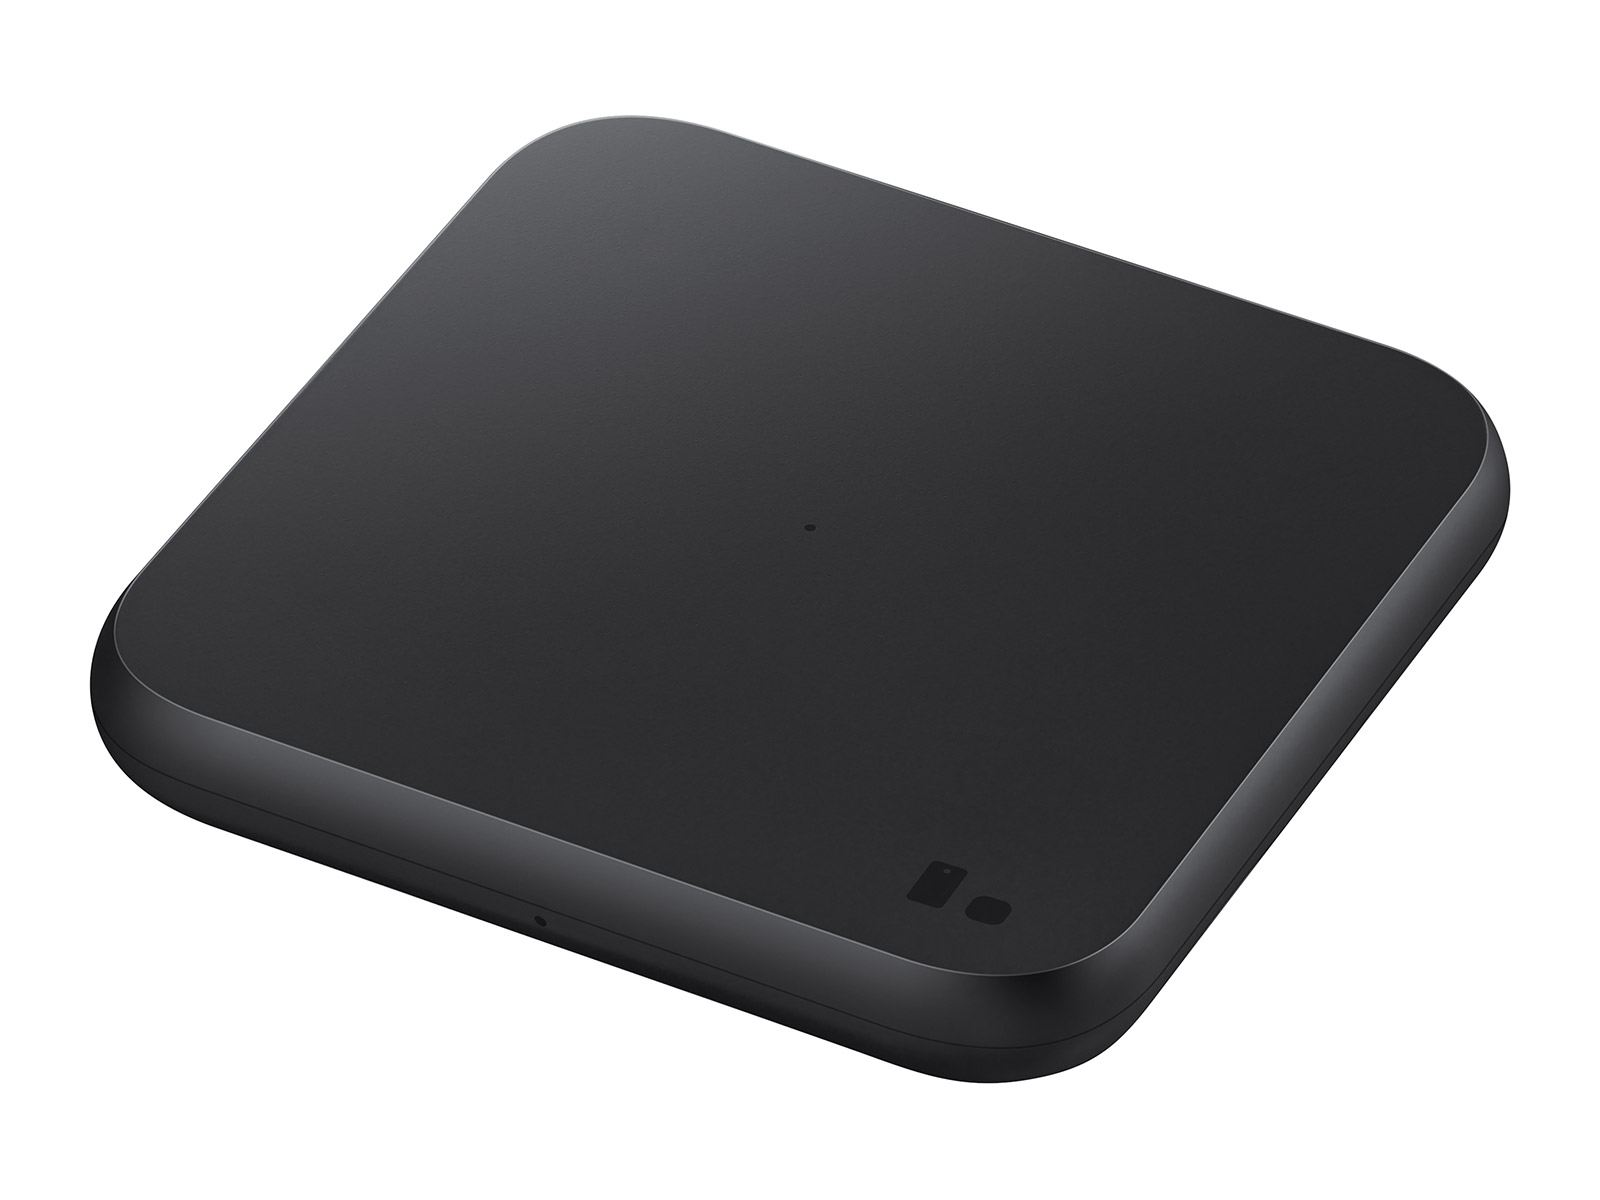 Thumbnail image of Wireless Charger, Black